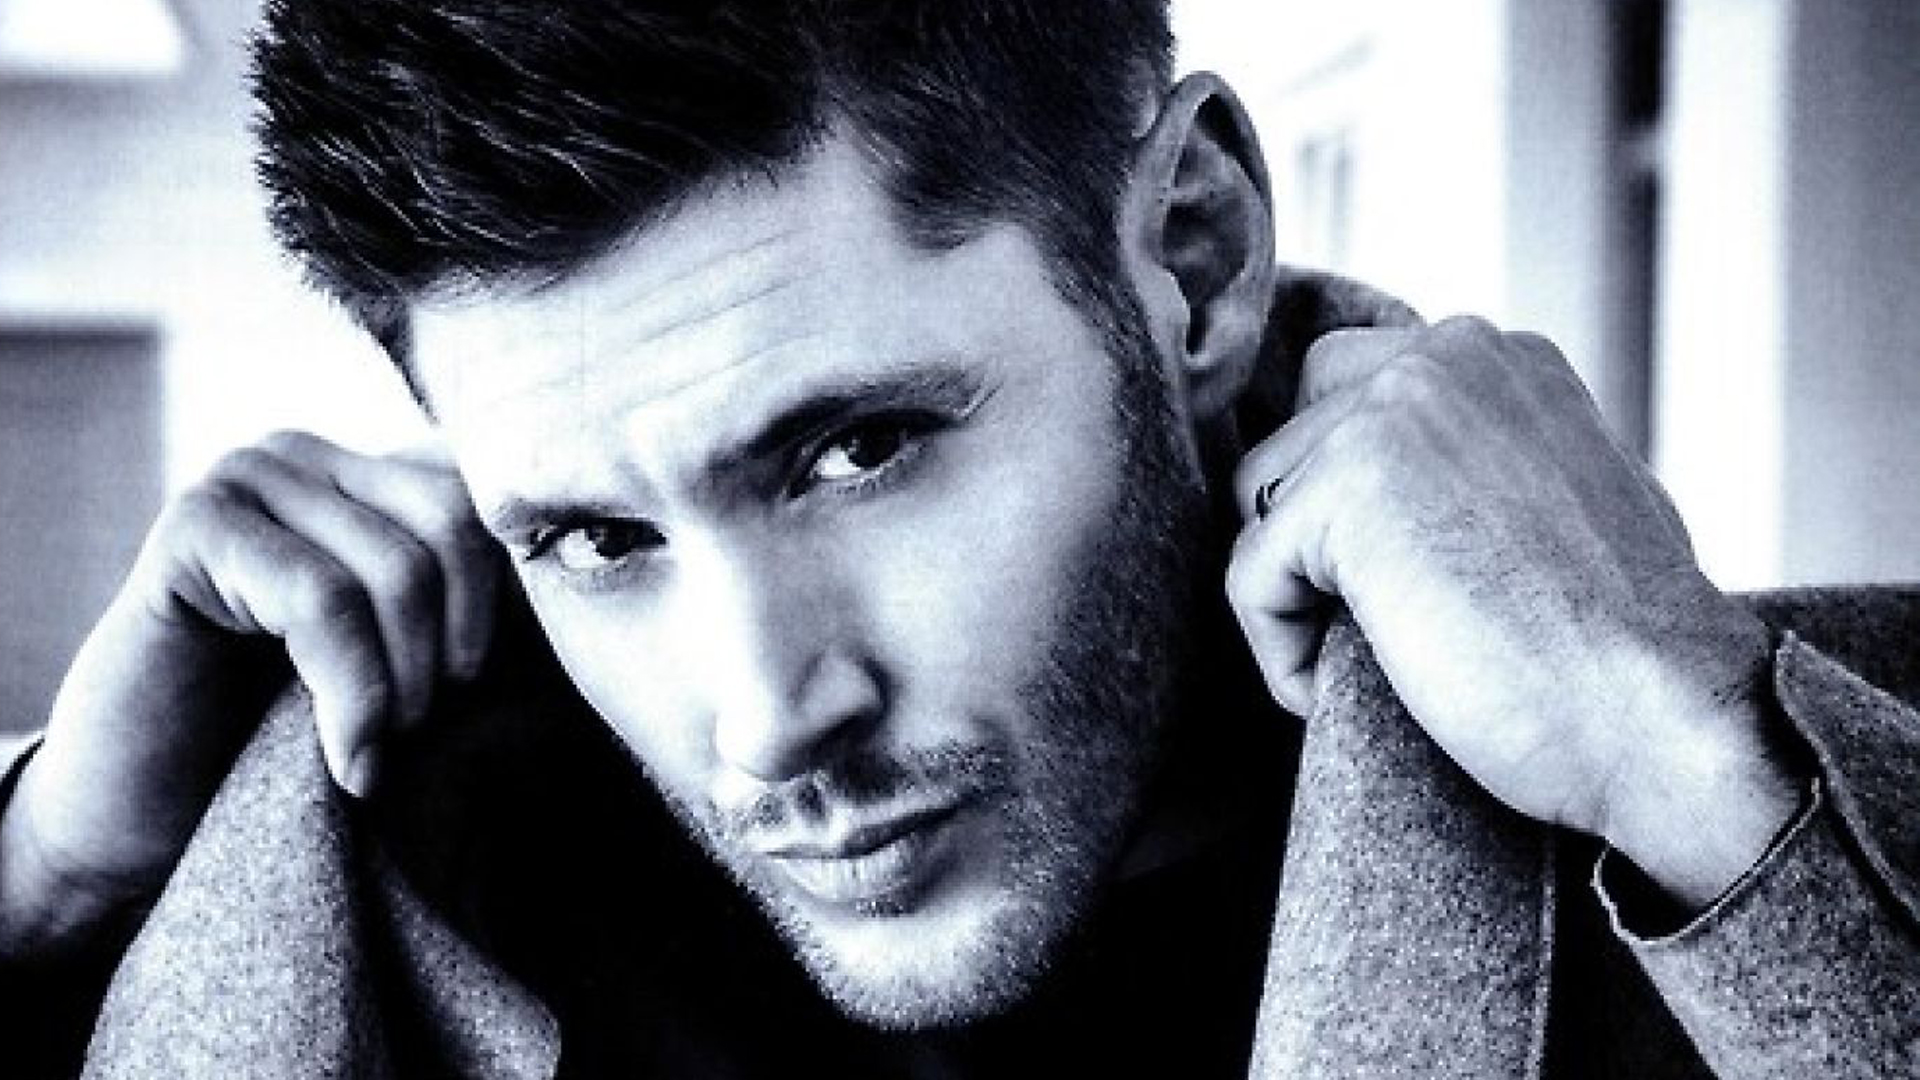 HD Wallpaper Jensen Ackles High Quality And Definition